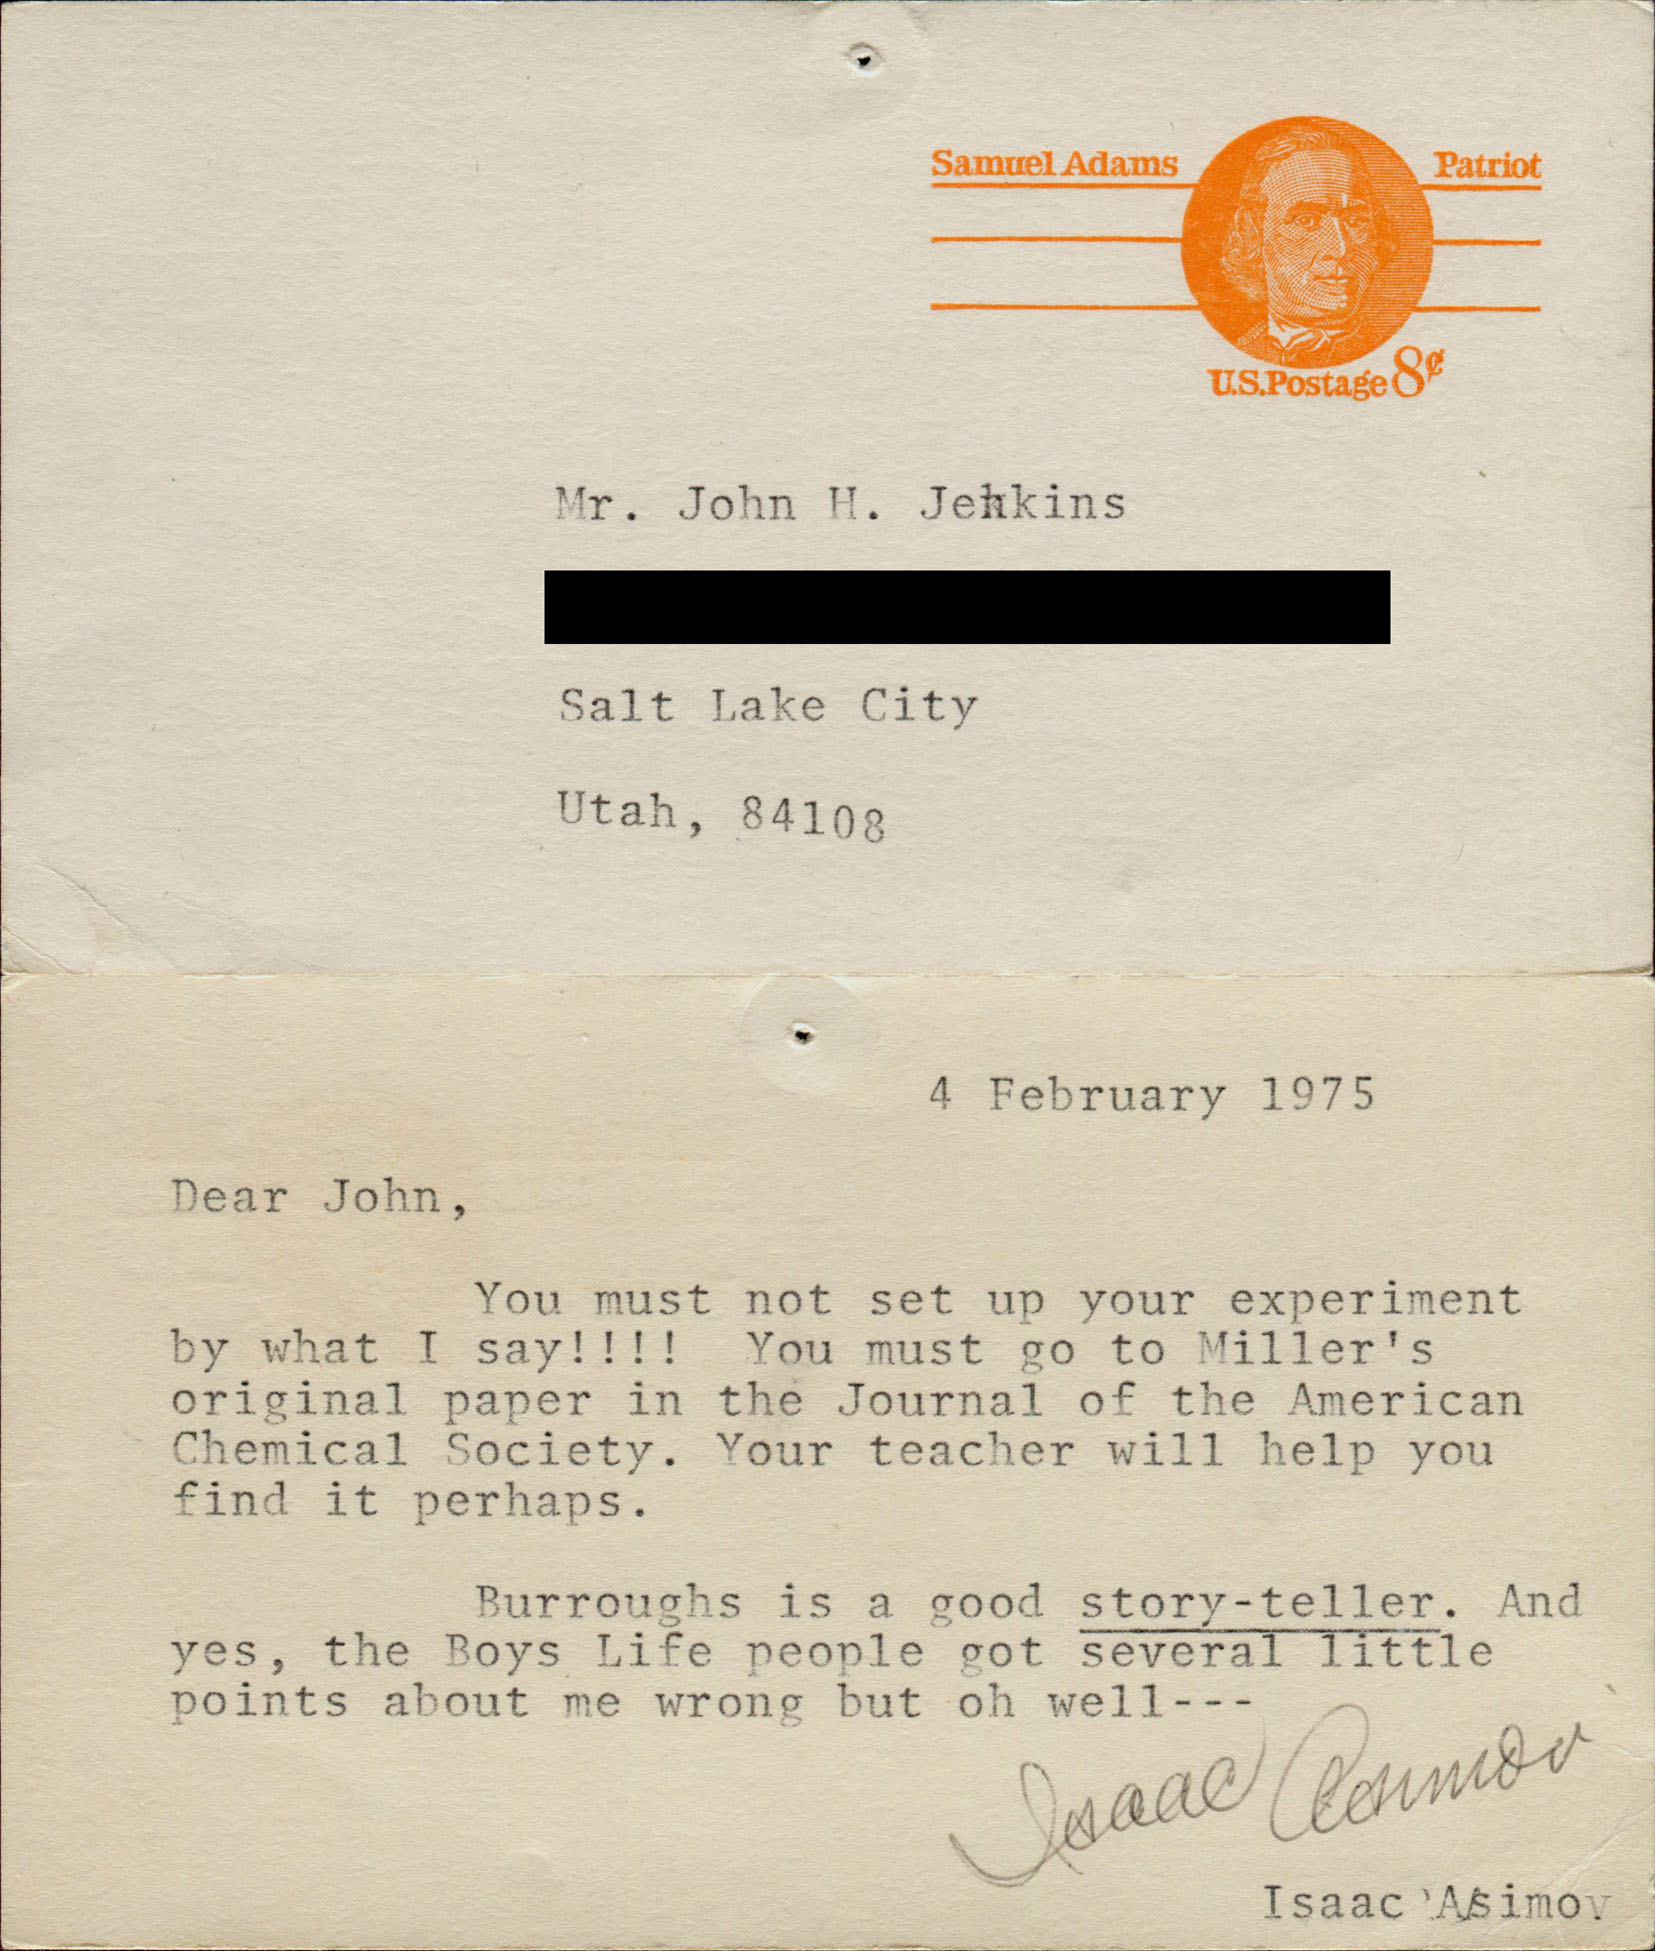 4 February 1975. Dear John, You must not set up your experiment by what I say!!!! You must go to Miller's original paper in the Journal of the American Chemical Society. Your teacher will help you find it perhaps. Burroughs is a good *story-teller*. And yes, the Boys Life people got several little points about me wrong but oh well--- Isaac Asimov